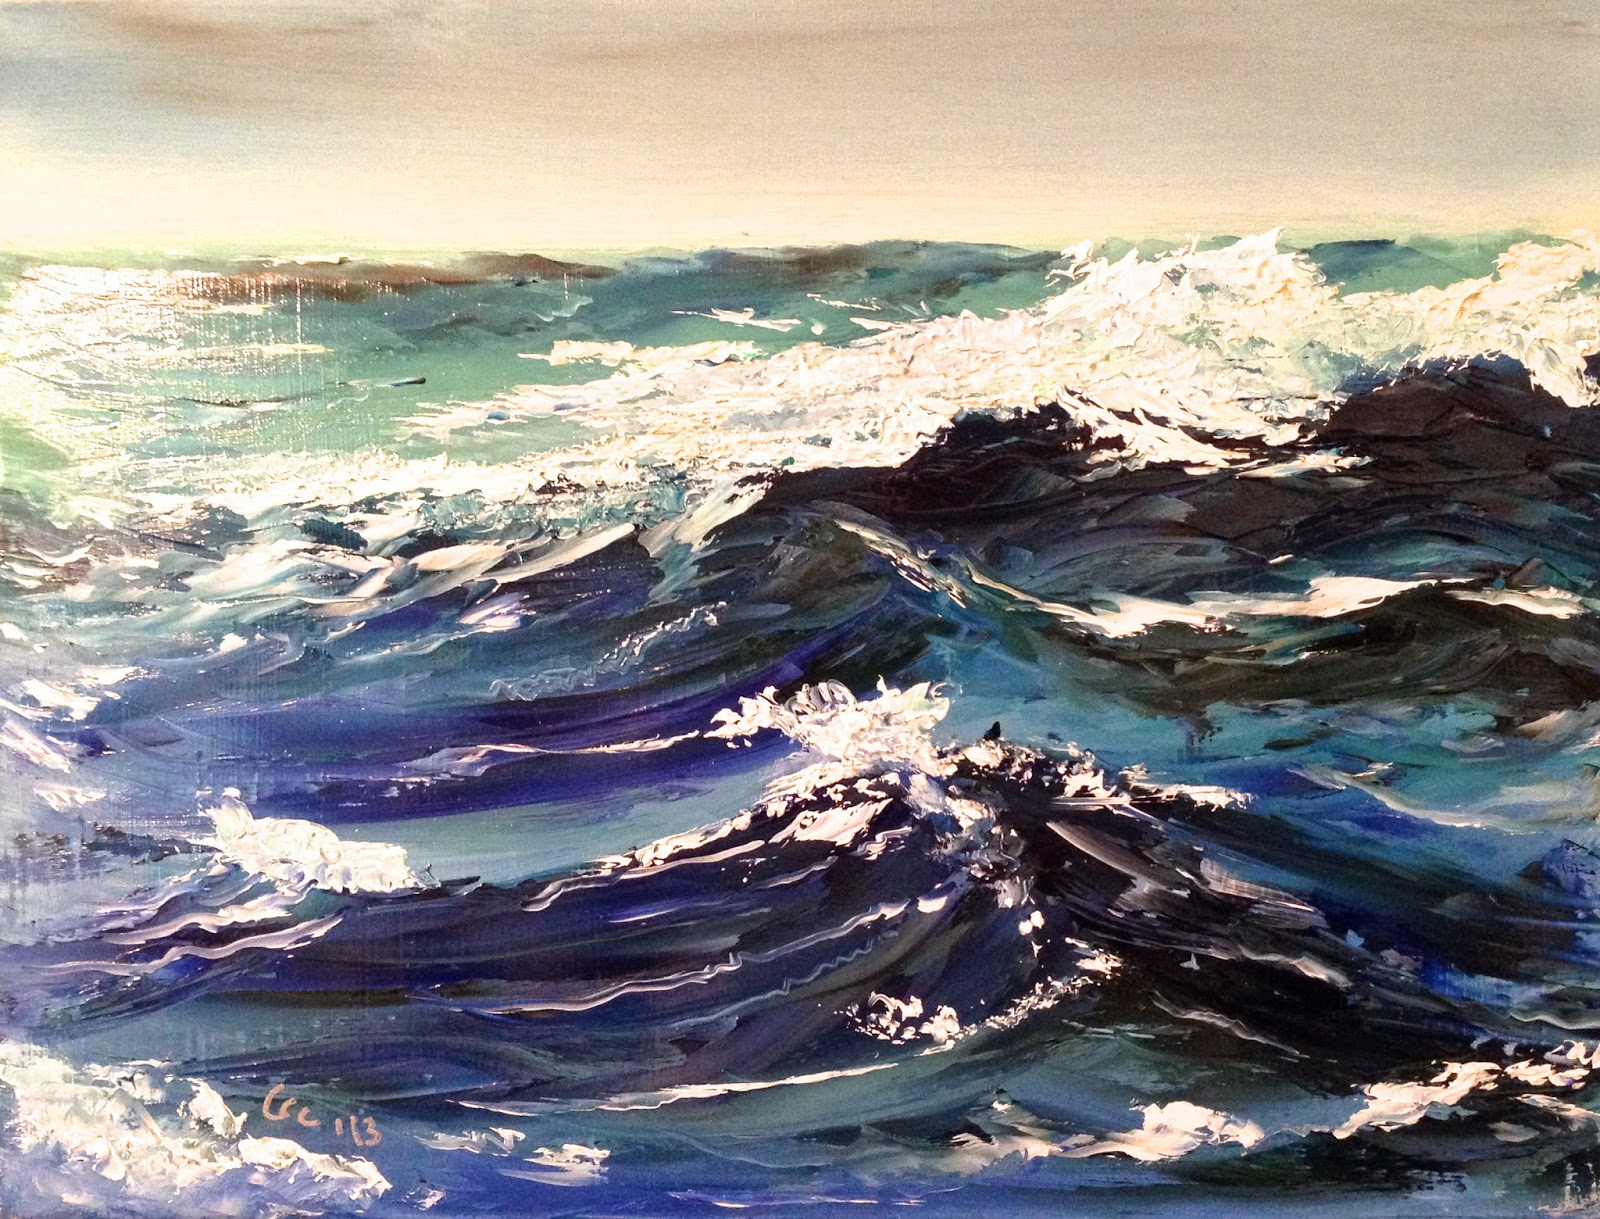 GC Paintings "The Angry Sea" Oil Painting